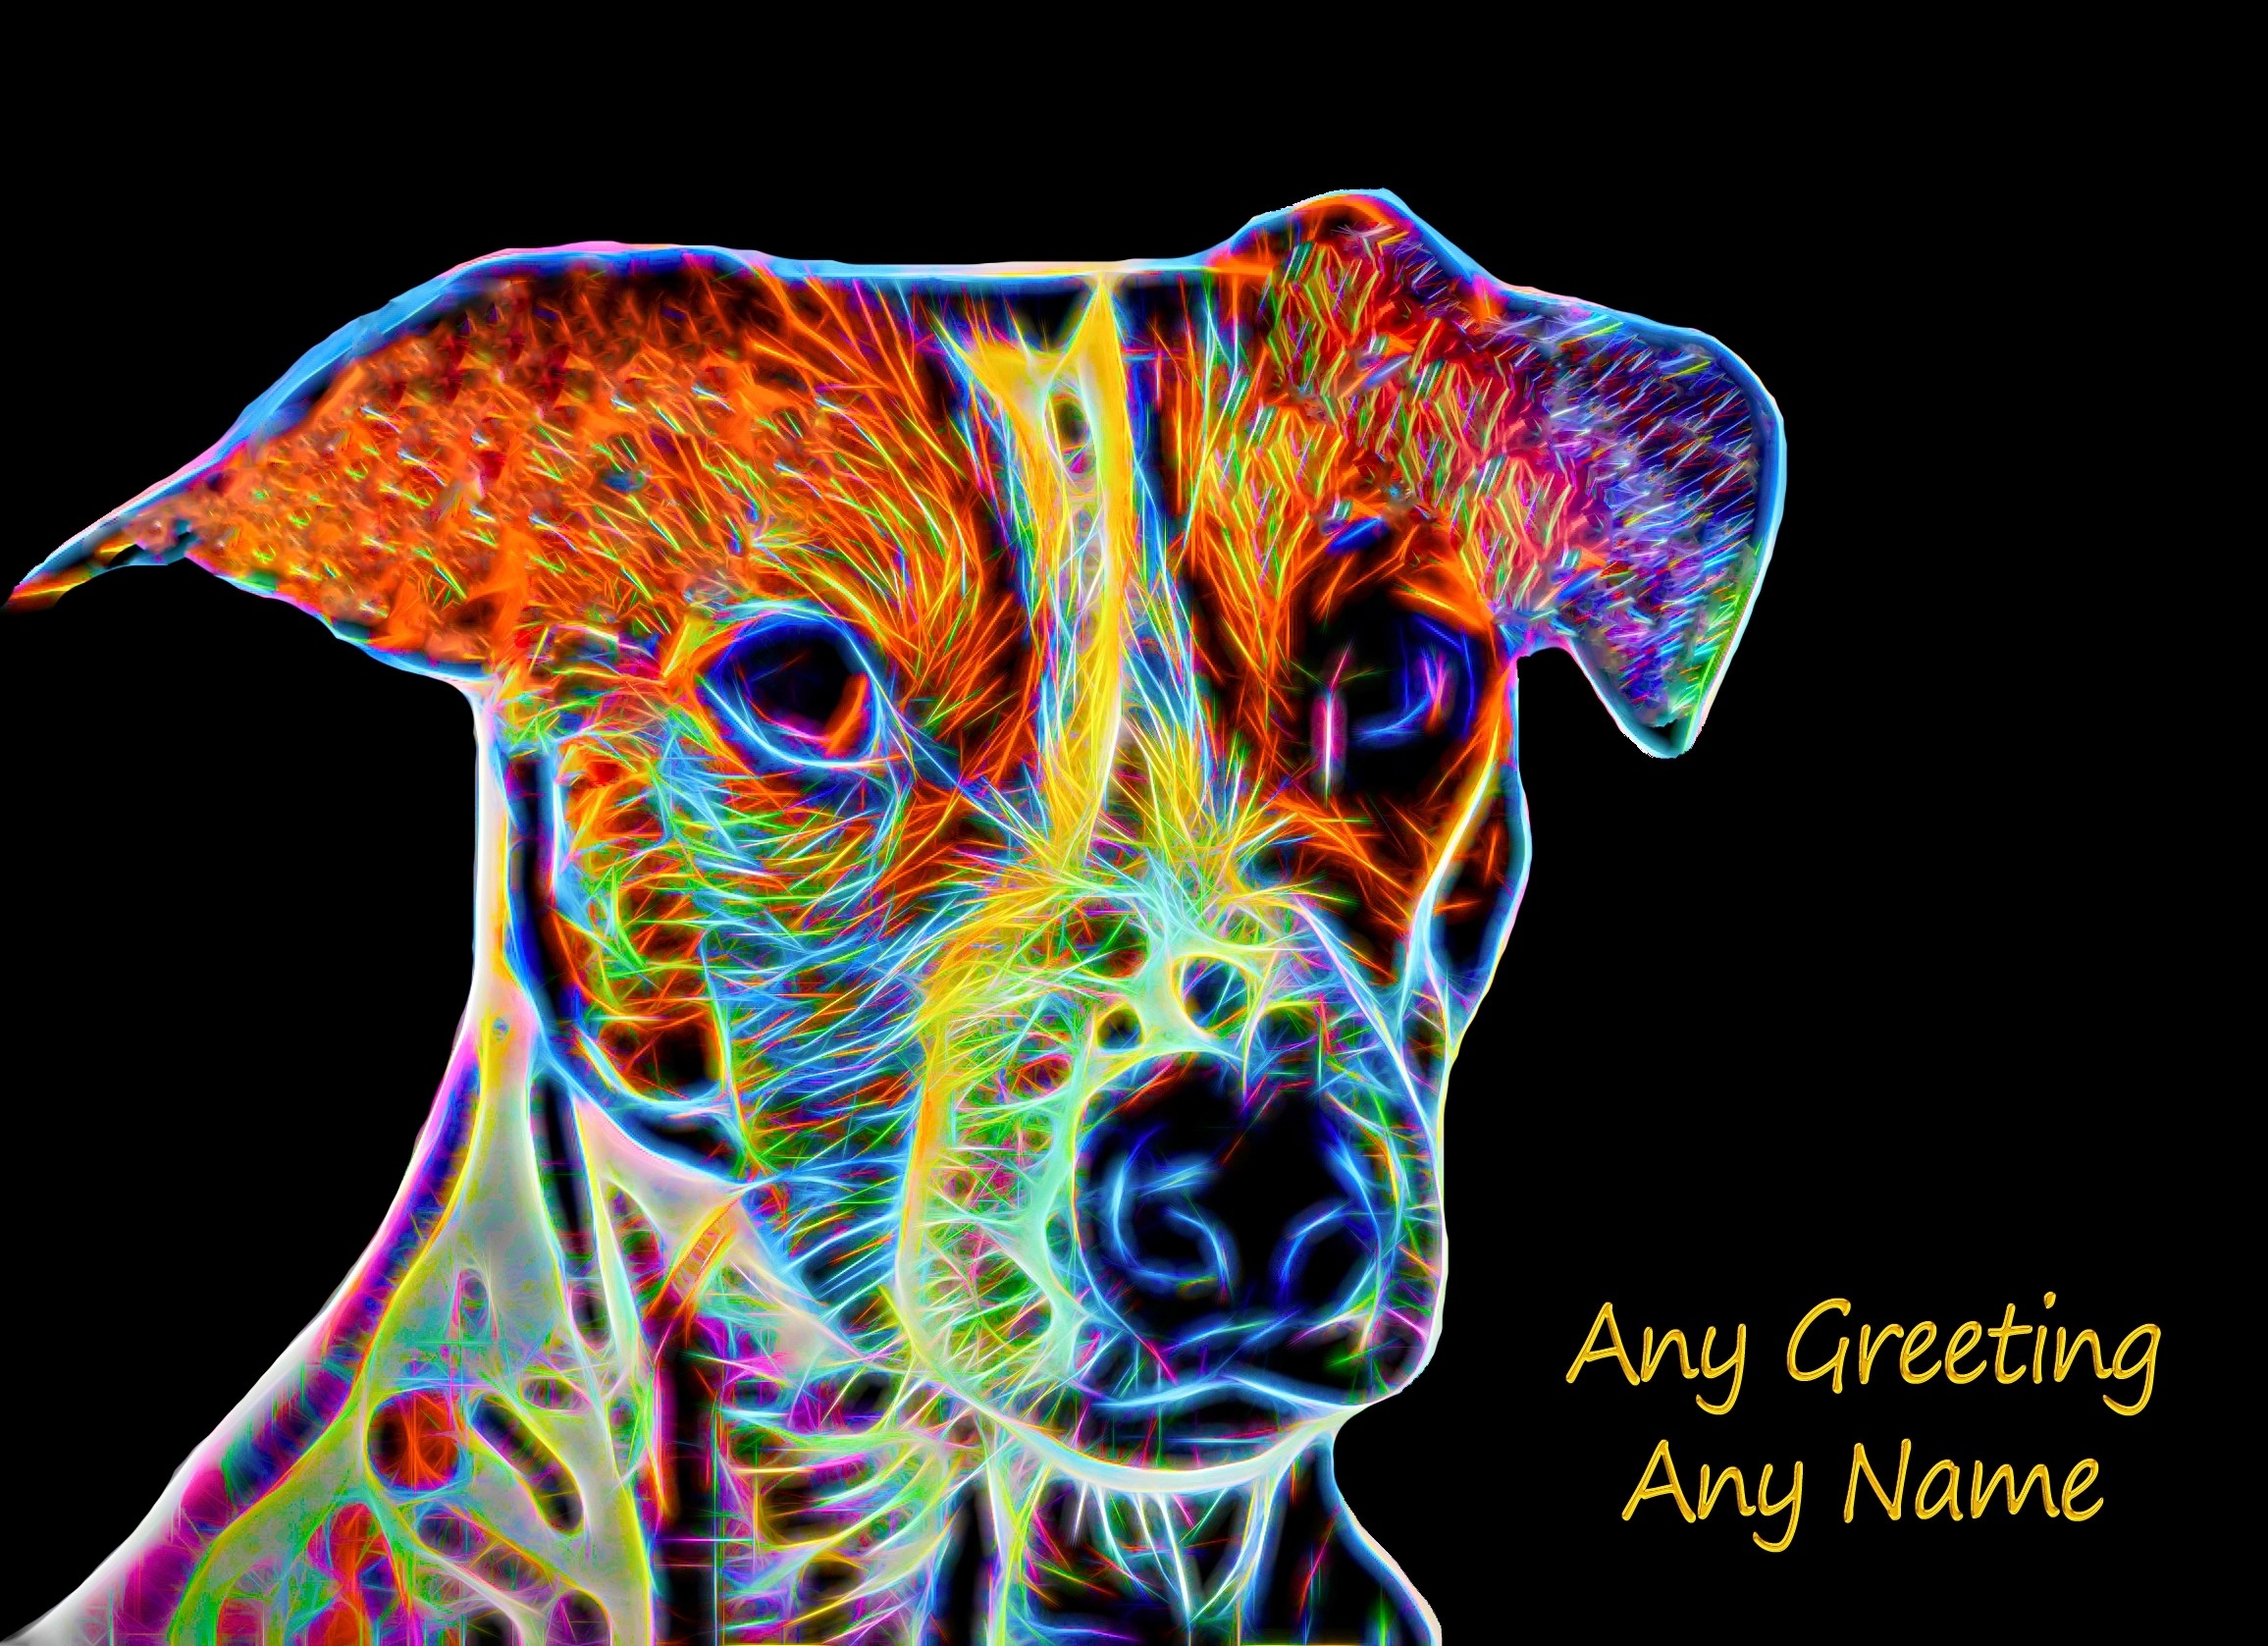 Personalised Jack Russell Neon Art Greeting Card (Birthday, Christmas, Any Occasion)